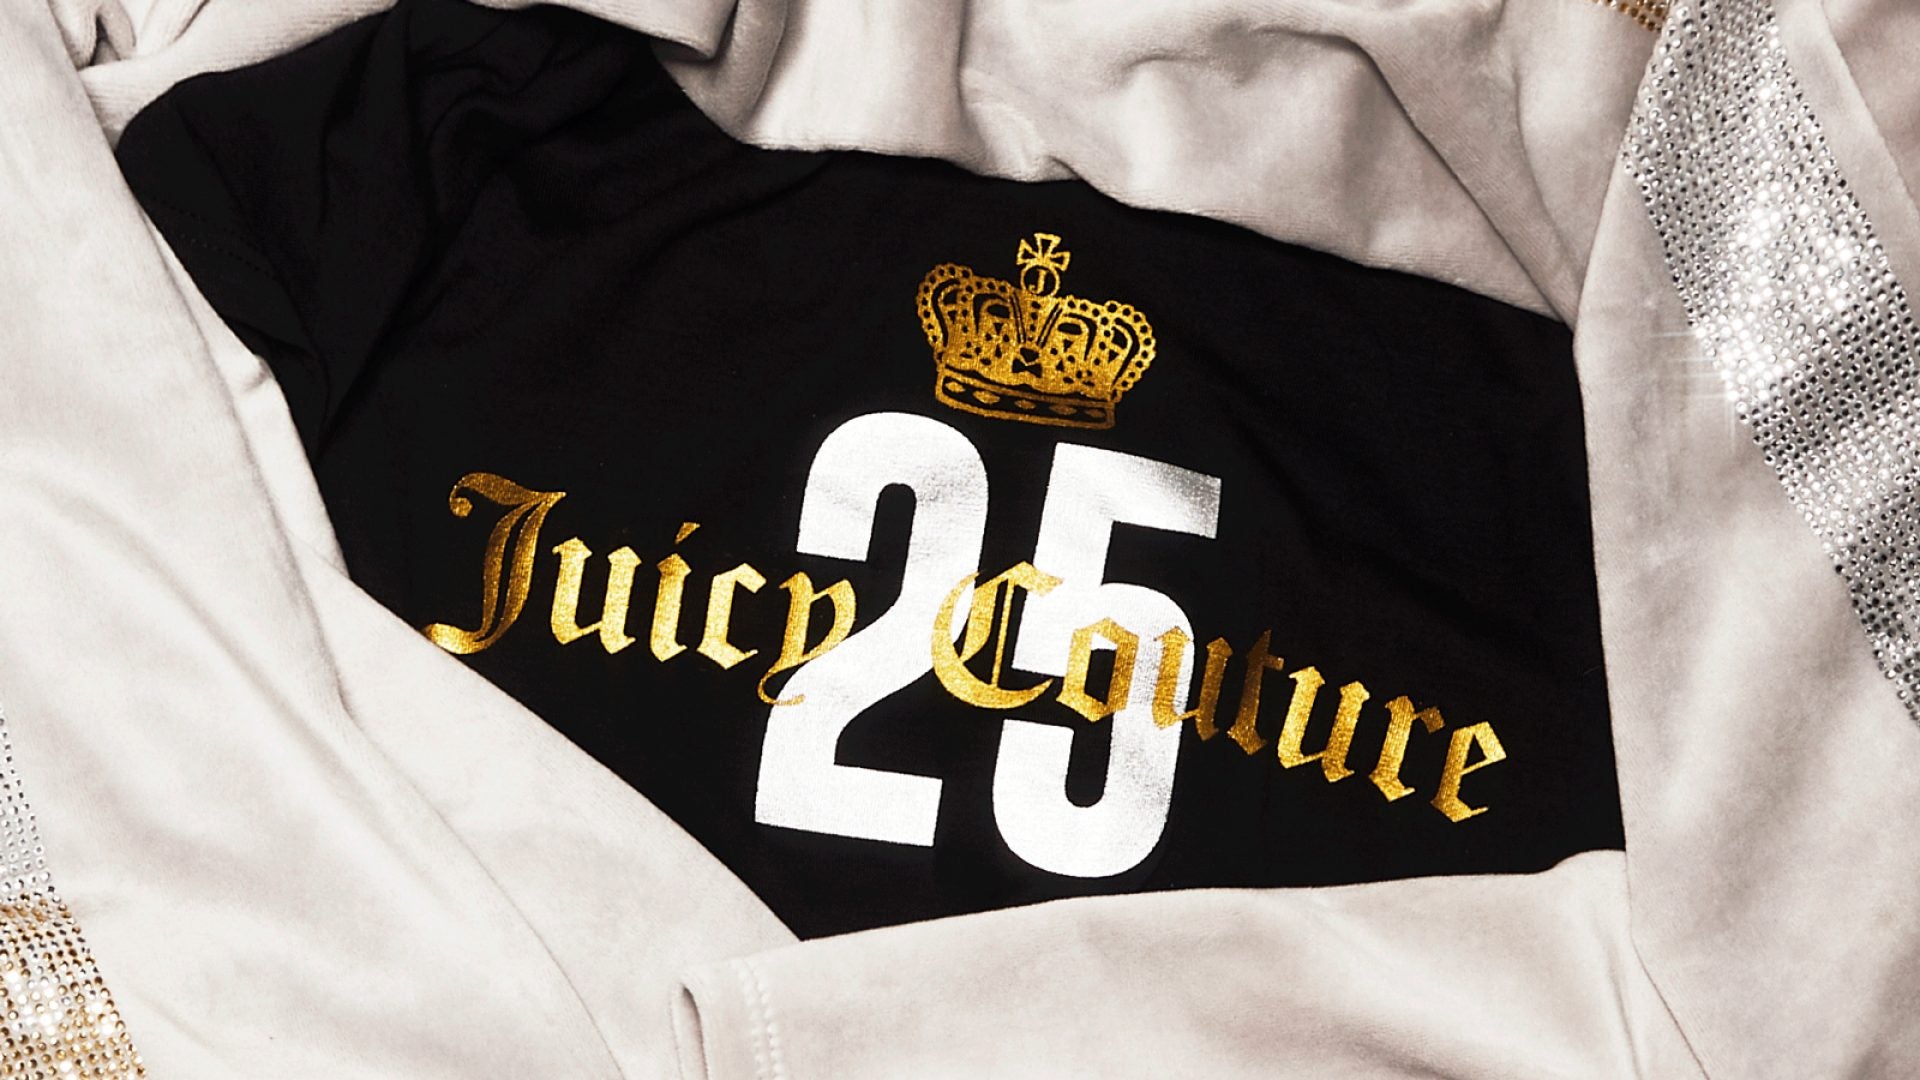 Juicy Couture Celebrates Its 25th Year In Business